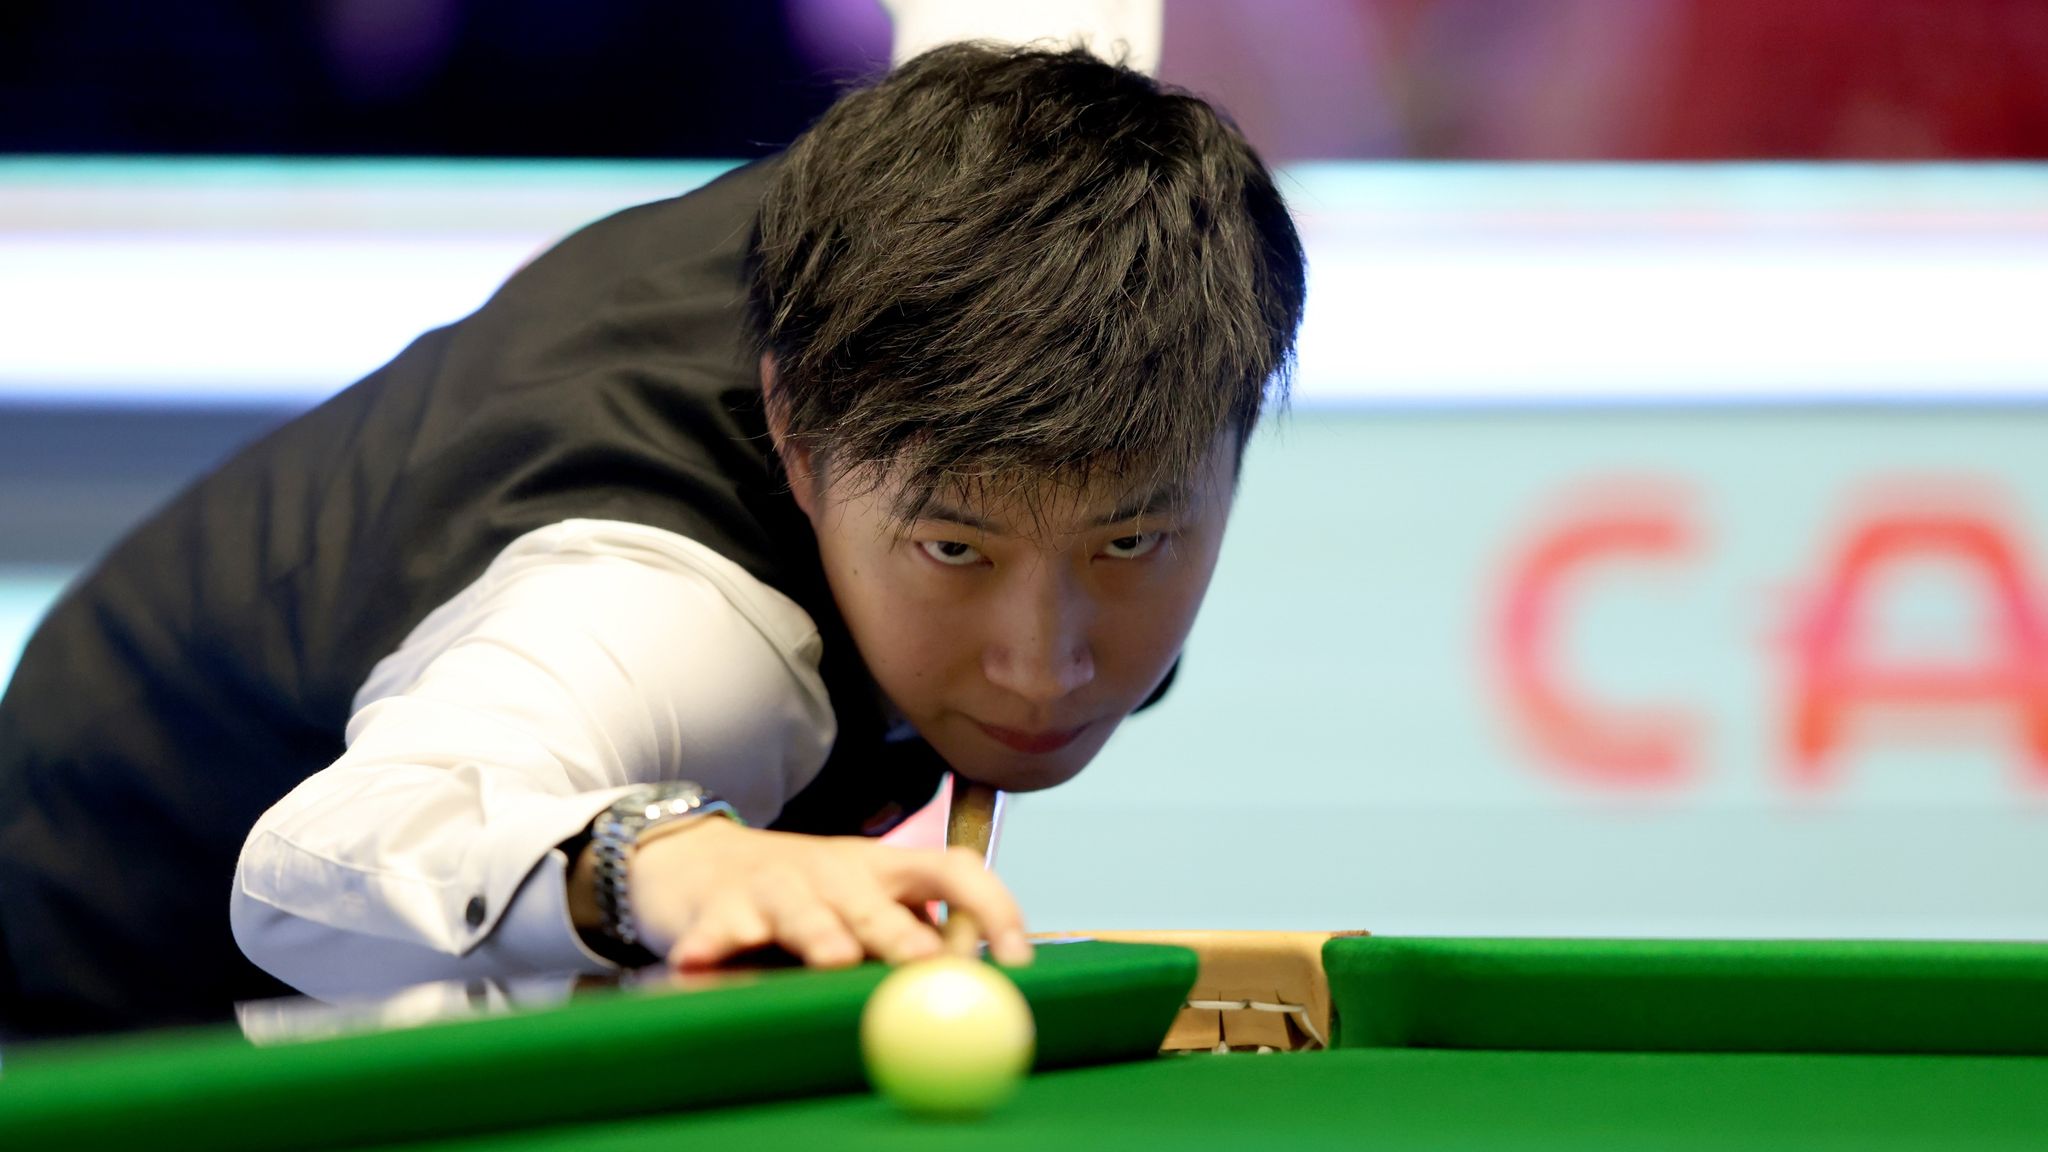 Ten Chinese snooker players face charges related to match-fixing, including Yan Bingtao and Zhao Xintong Snooker News Sky Sports